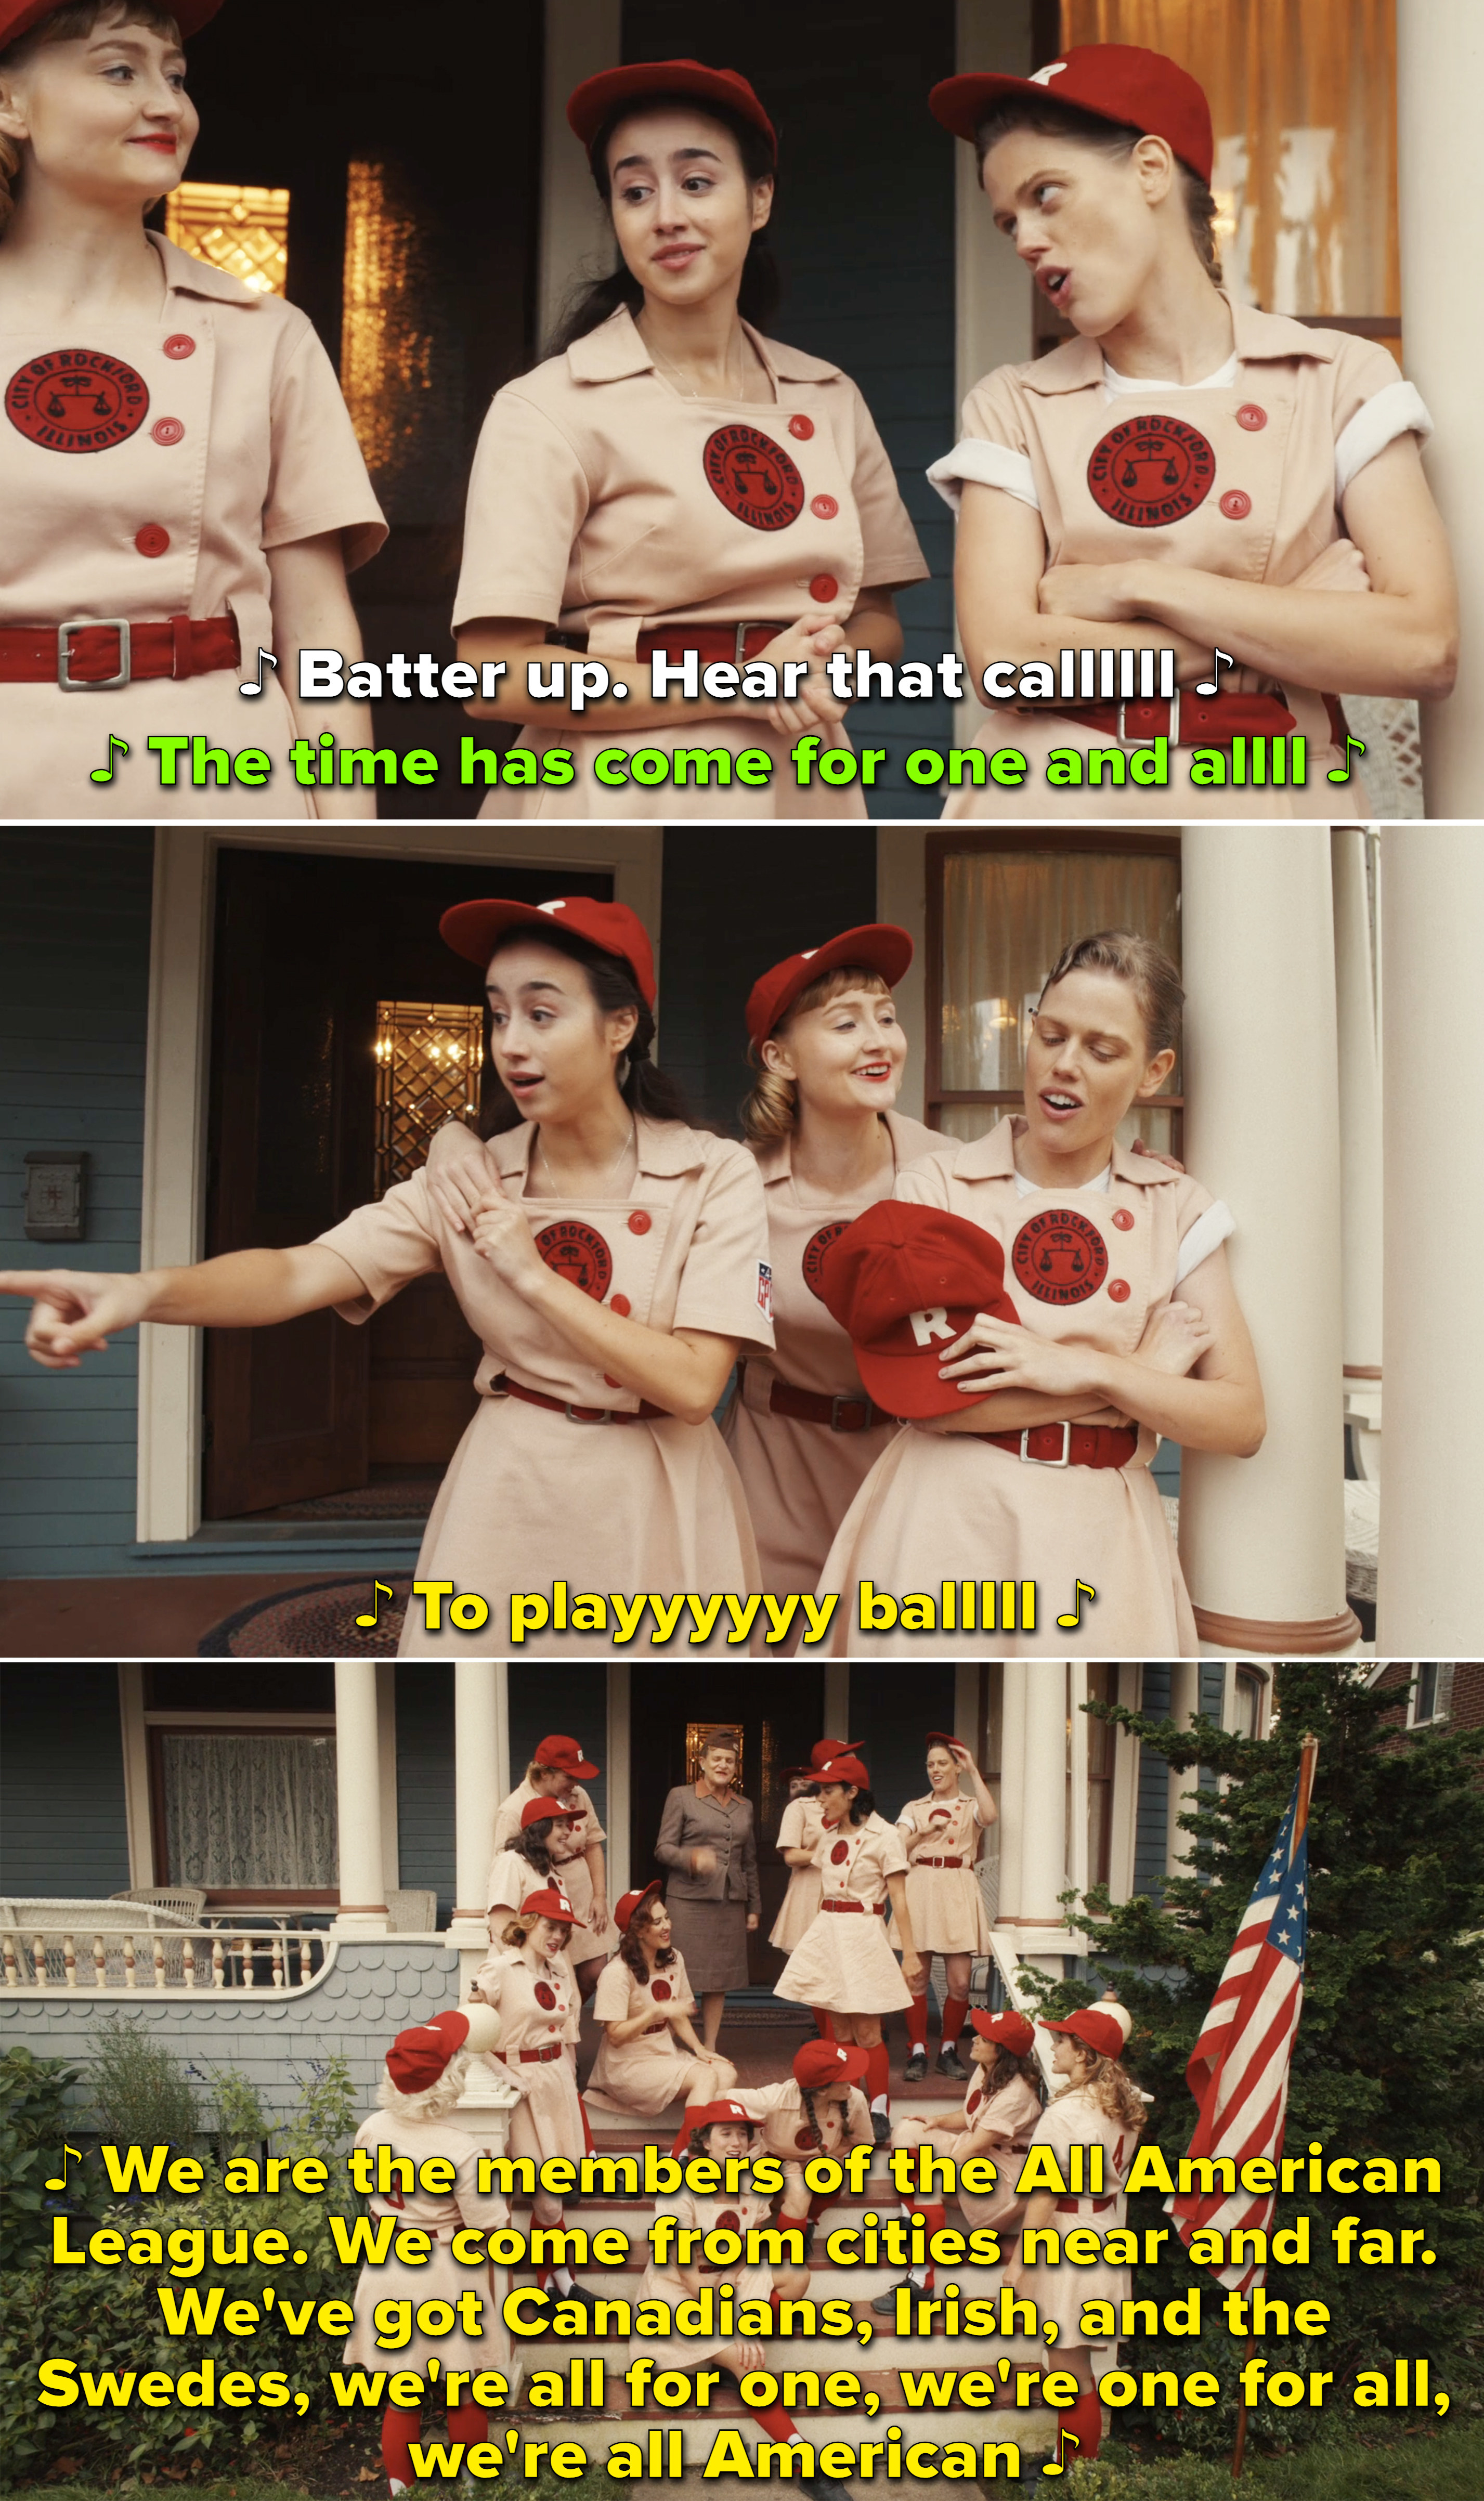 Screen shots of the players gathered and singing Batter Up from &quot;A League of Their Own&quot;